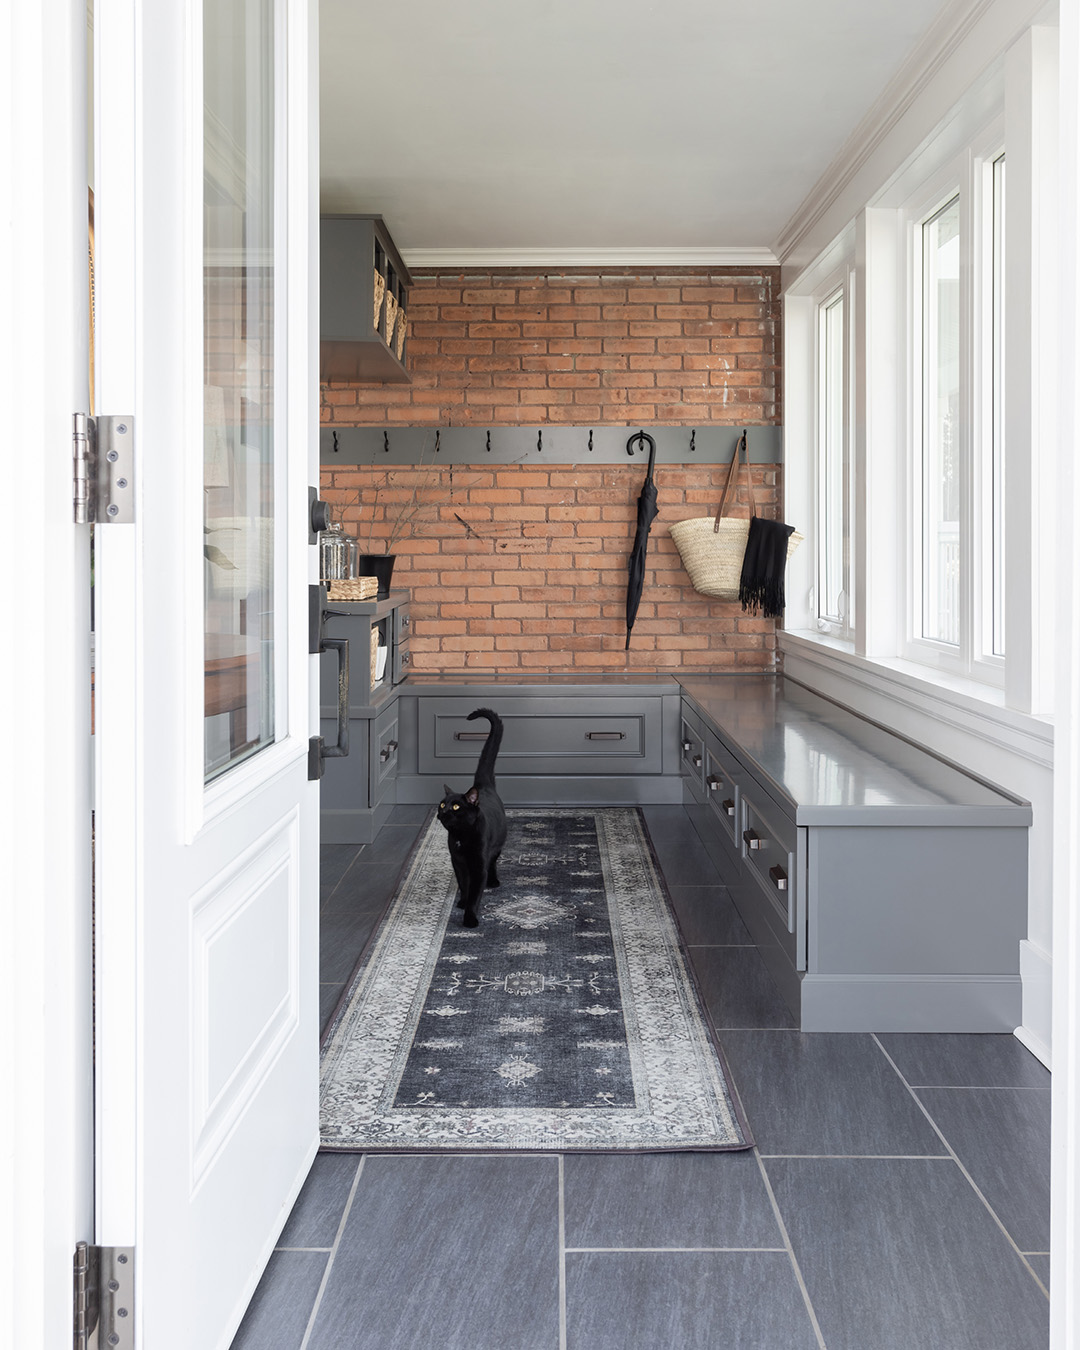 After years of serving us well, our mudroom was in need of a little decluttering and refreshing recently. Here are a few little changes I've made in our home's timeless farmhouse mudroom.